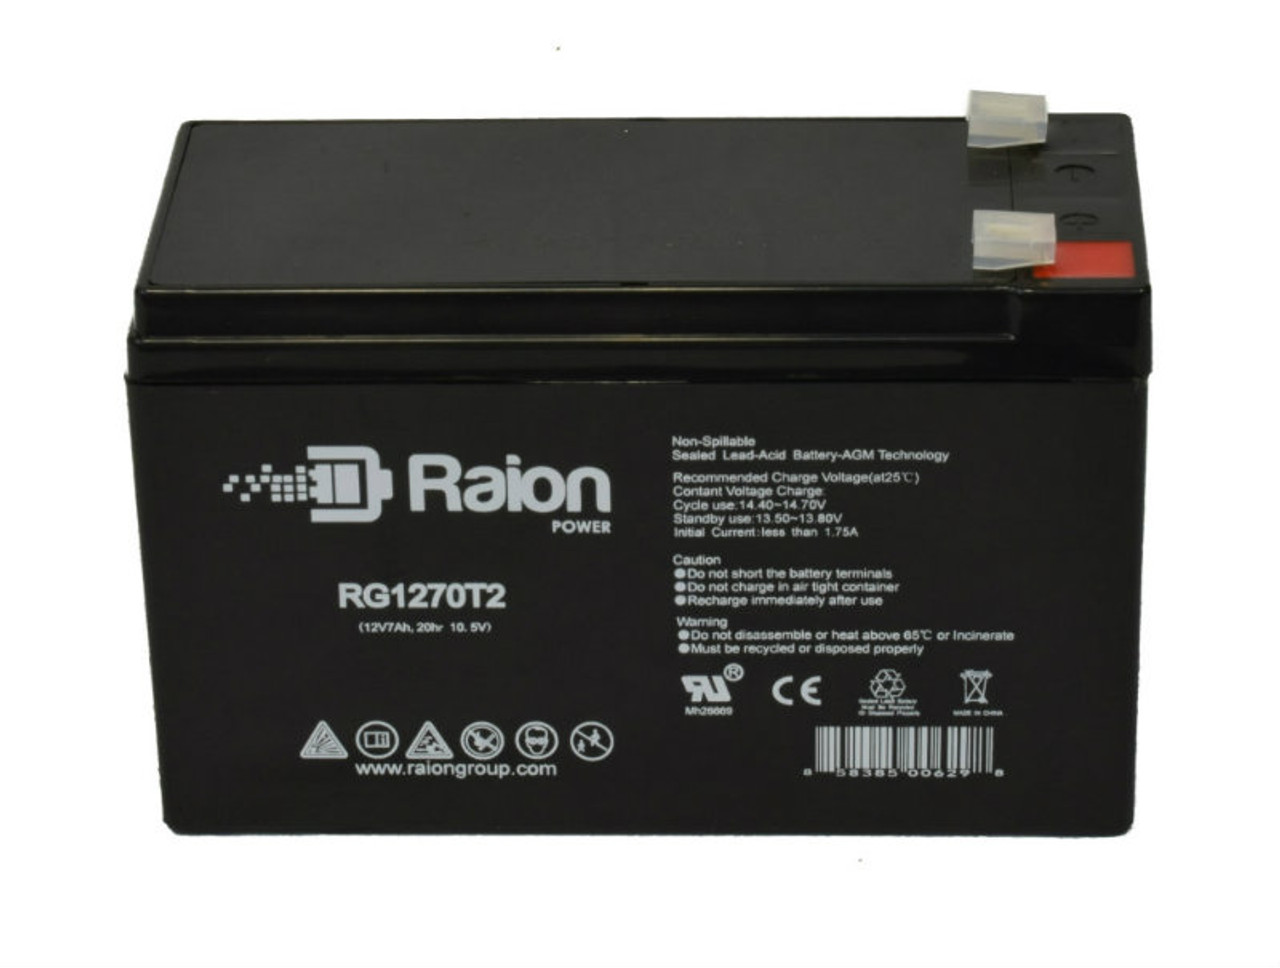 Raion Power RG1270T2 12V 7Ah Lead Acid Battery for Kidzone 060-ROT-15 12V Electric Tractor with Trailer